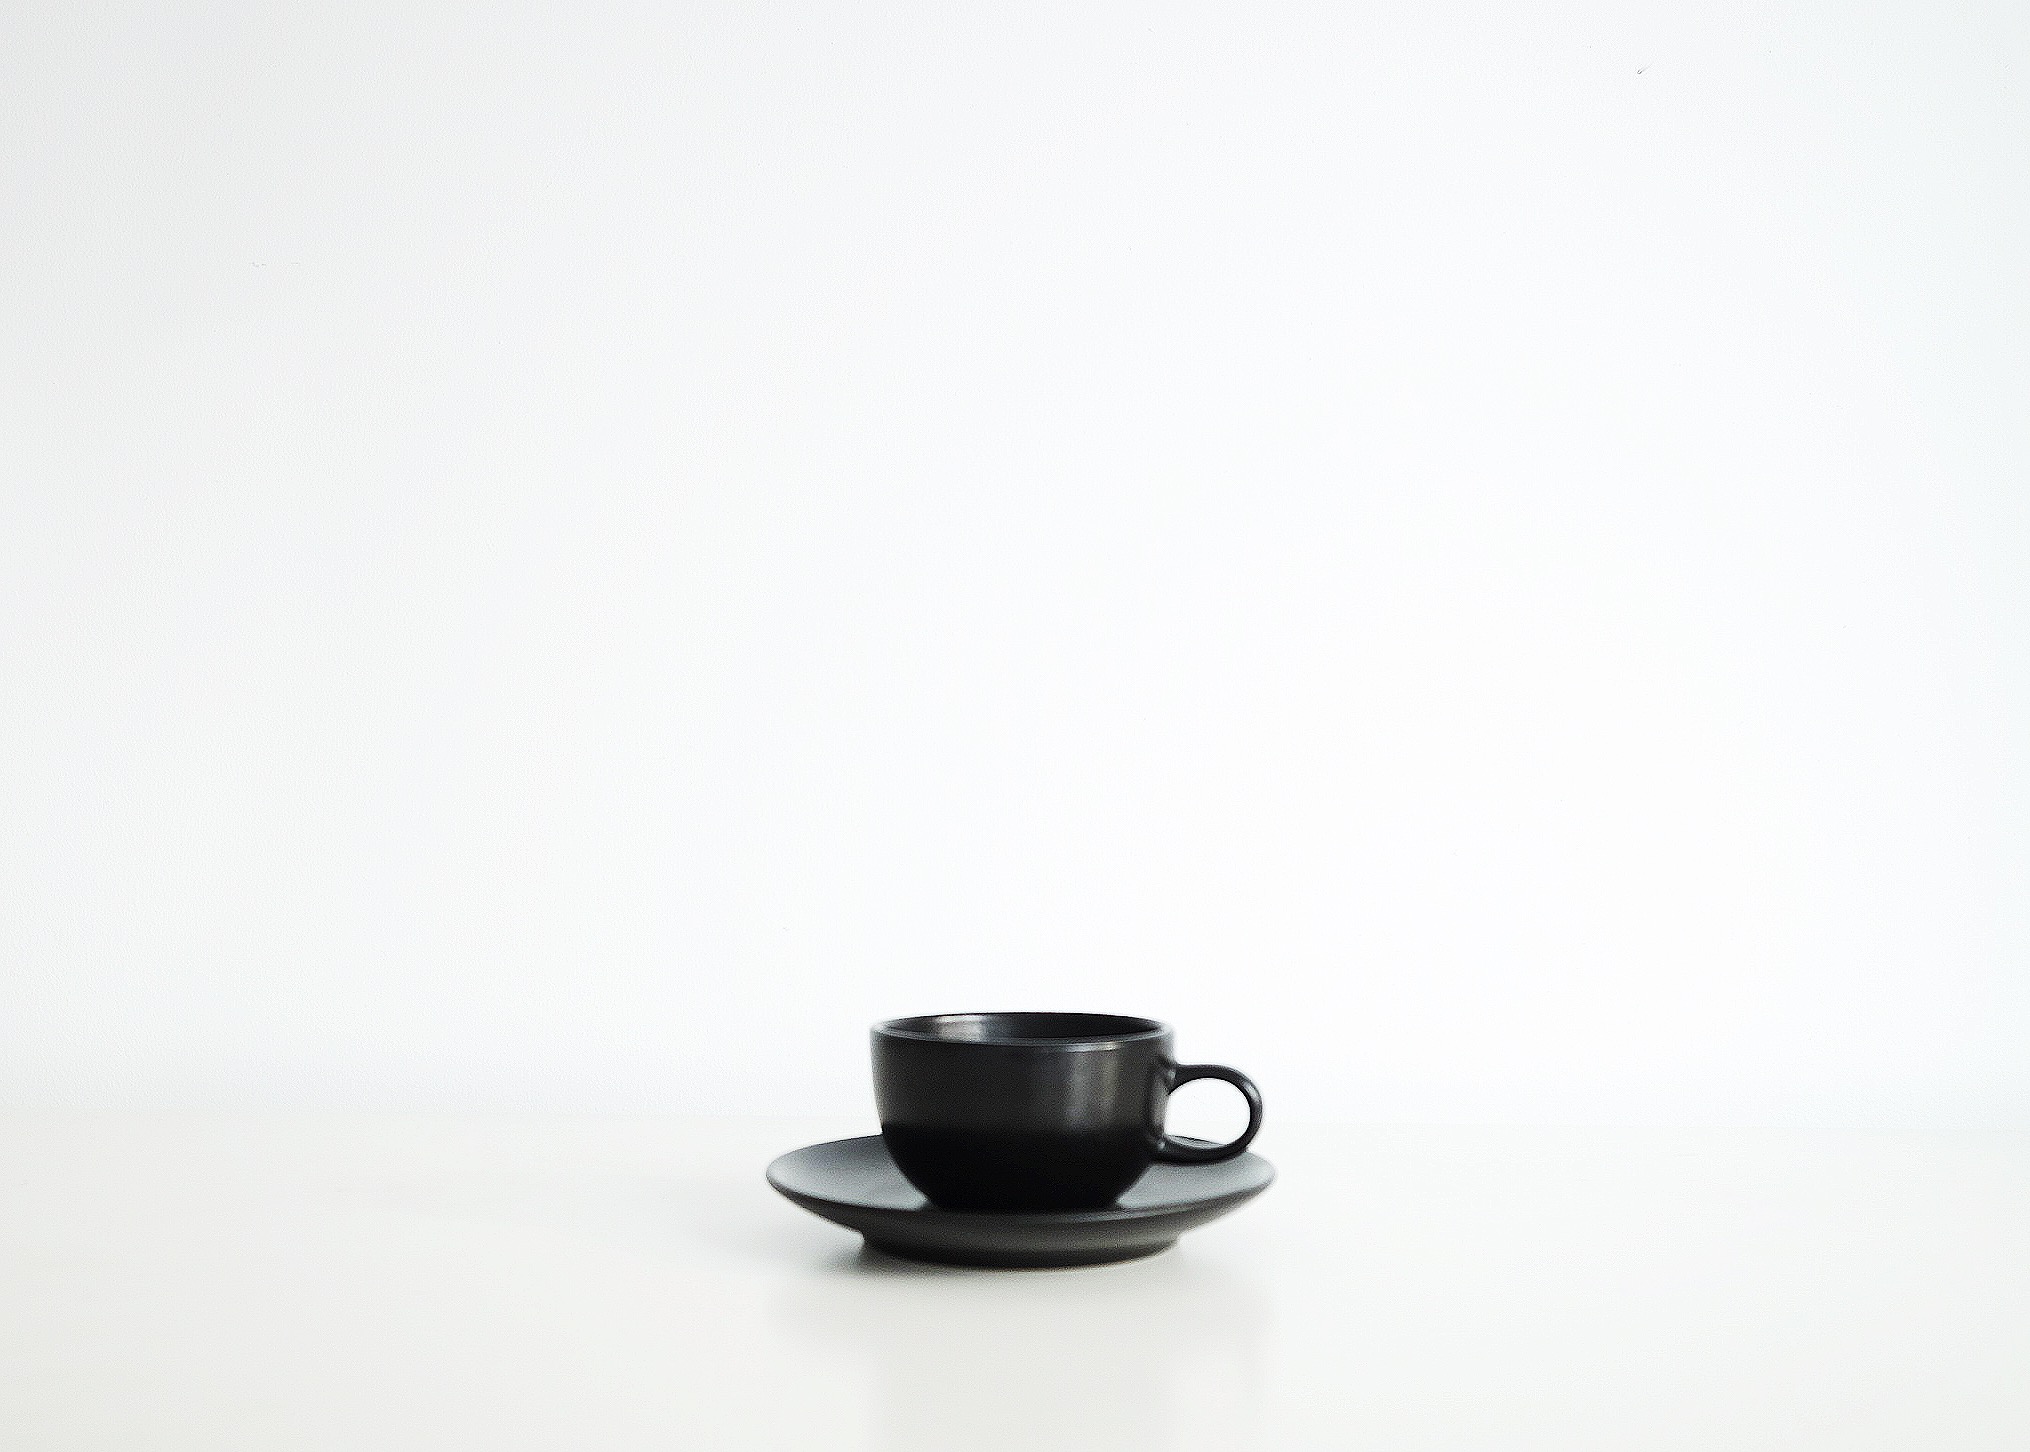 Ode to a Coffee Cup — The Little Black Coffee Cup